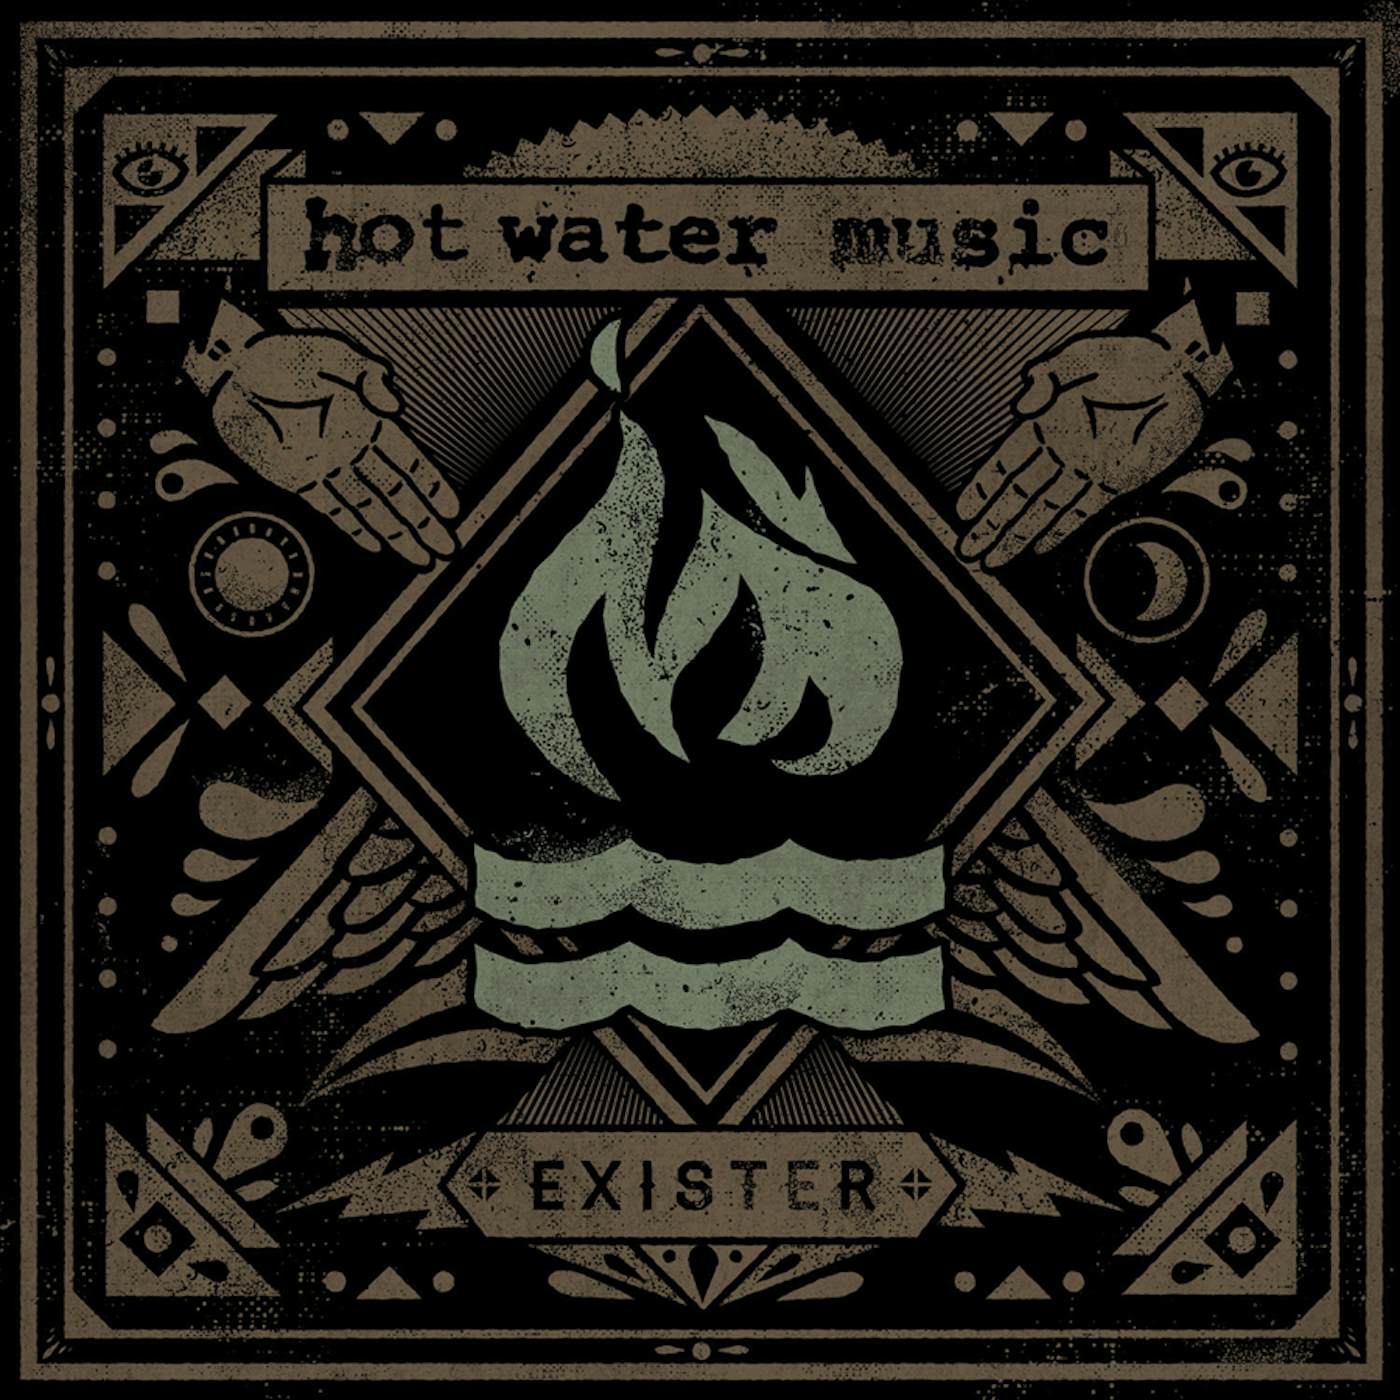 Hot Water Music Exister Vinyl Record